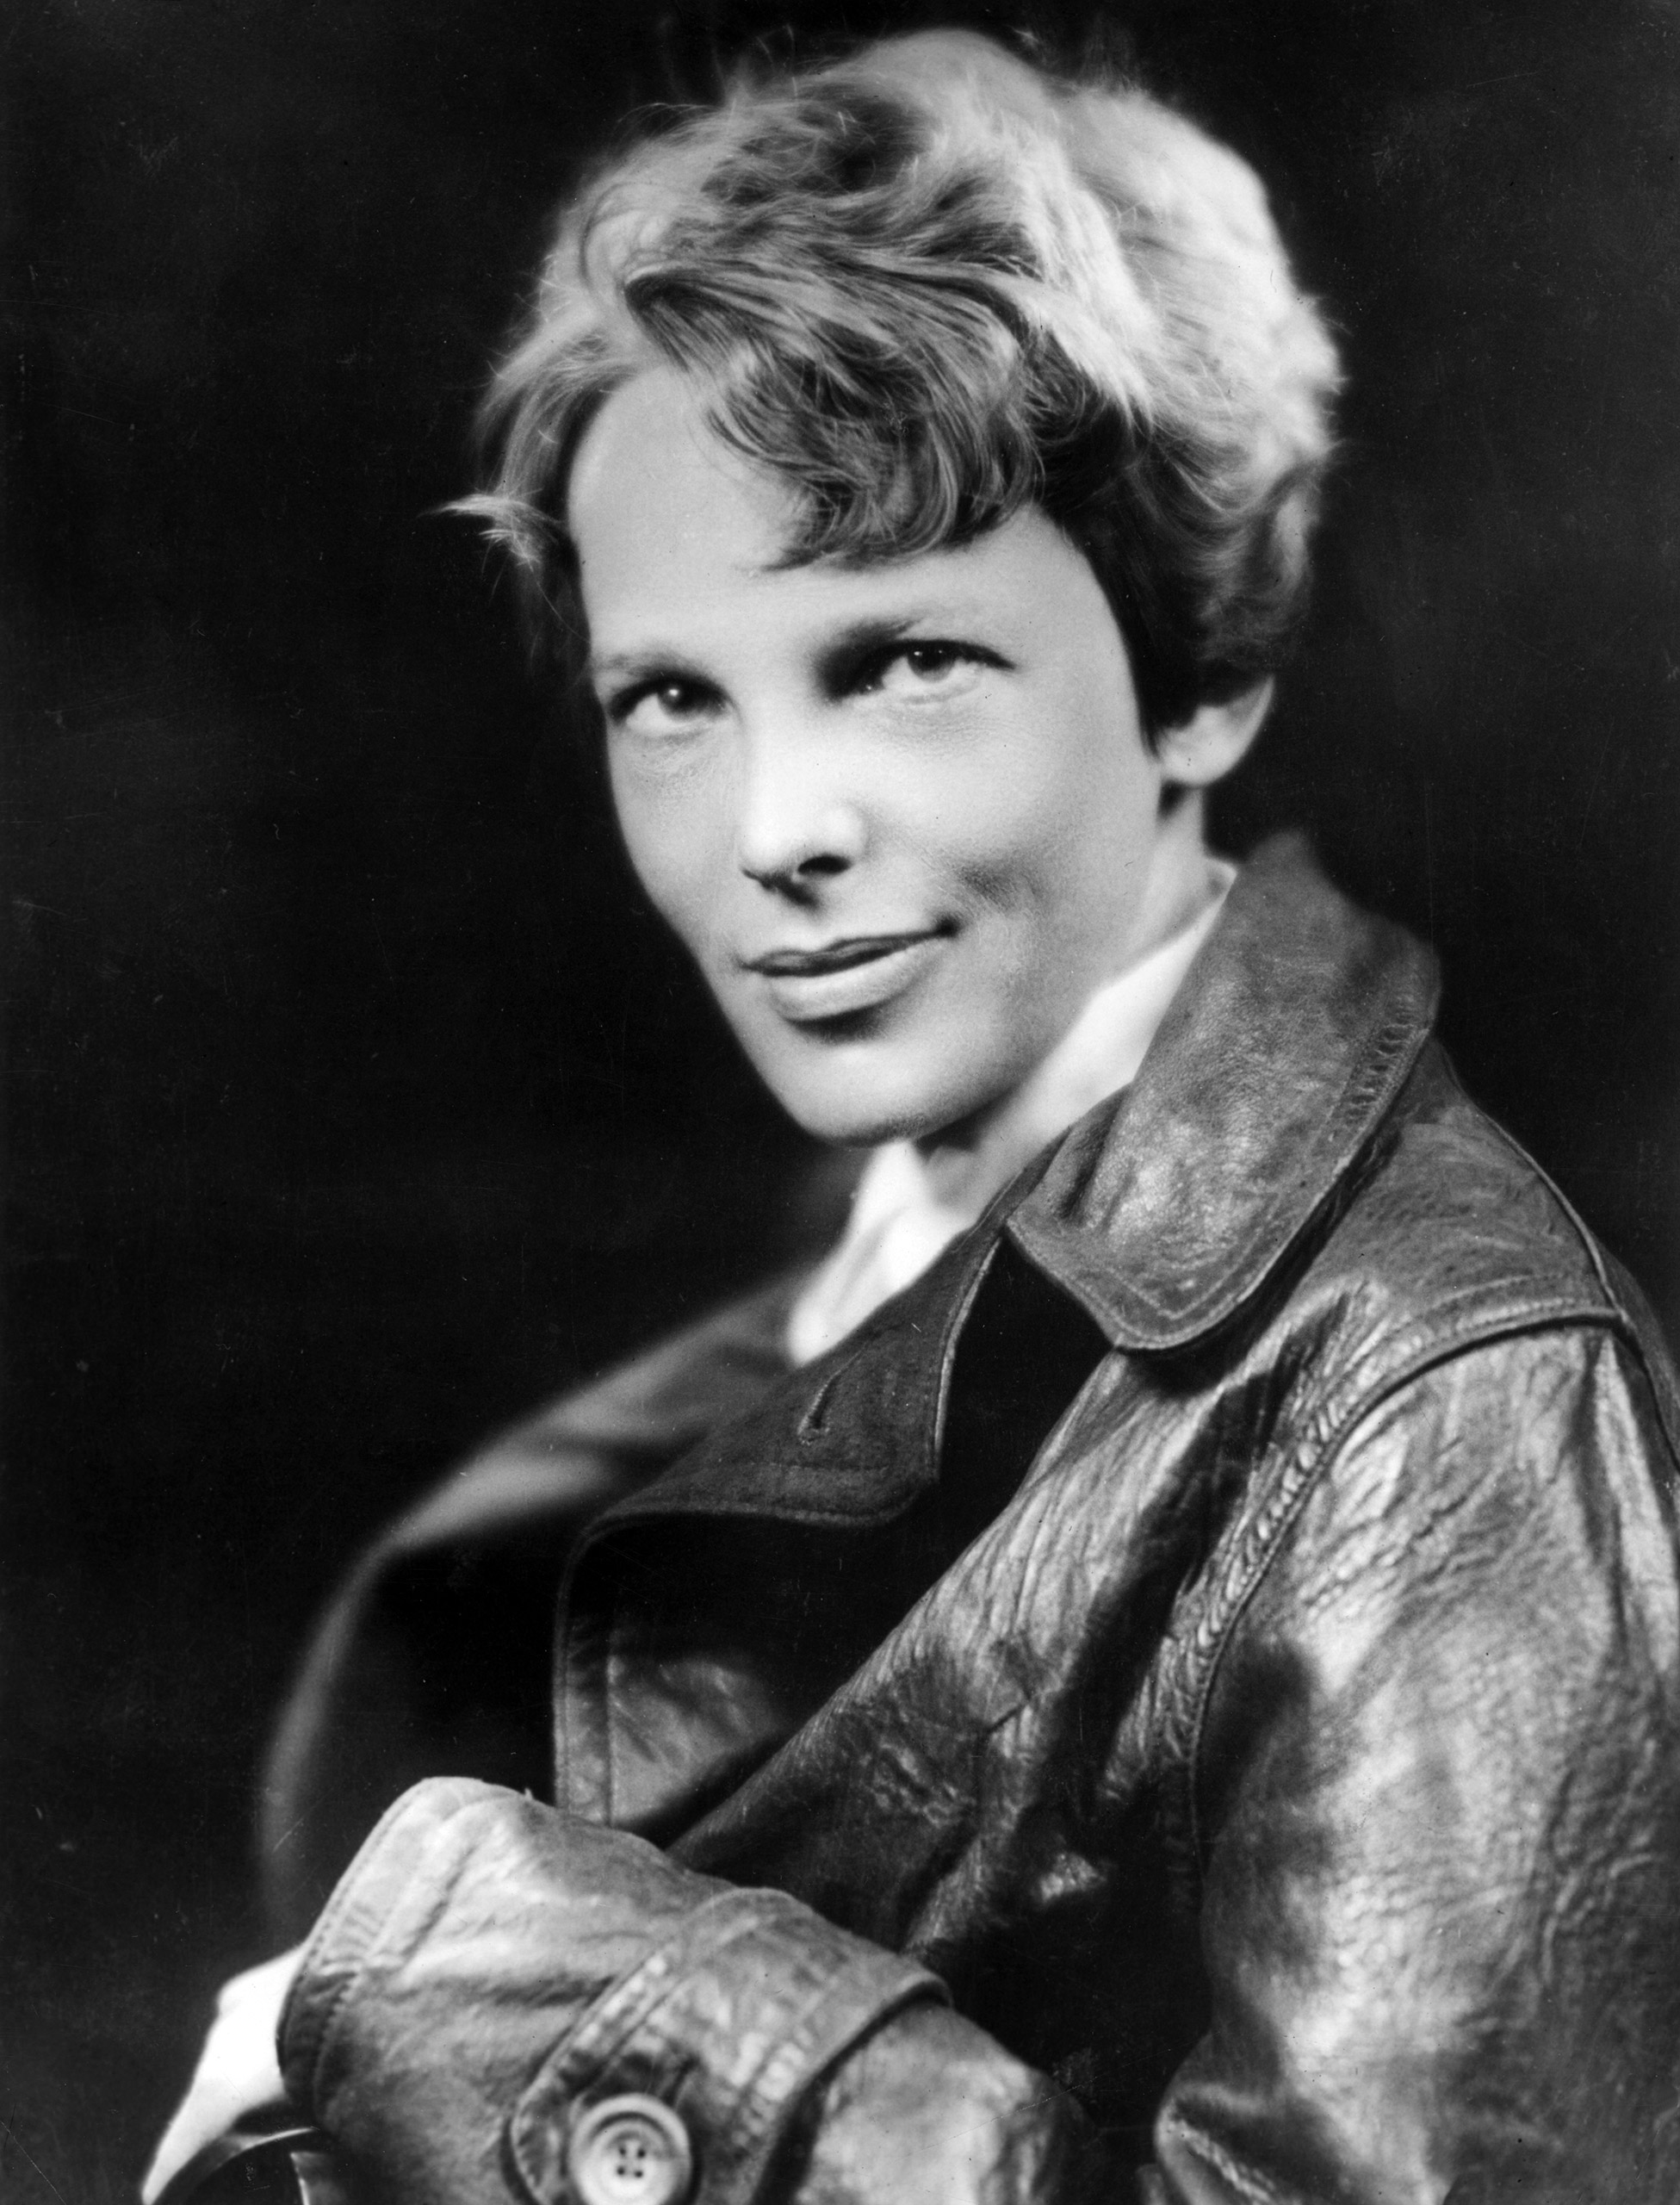 American aviator Amelia Earhart, the first woman to complete a solo transatlantic flight, wearing a leather jacket. Circa 1932.